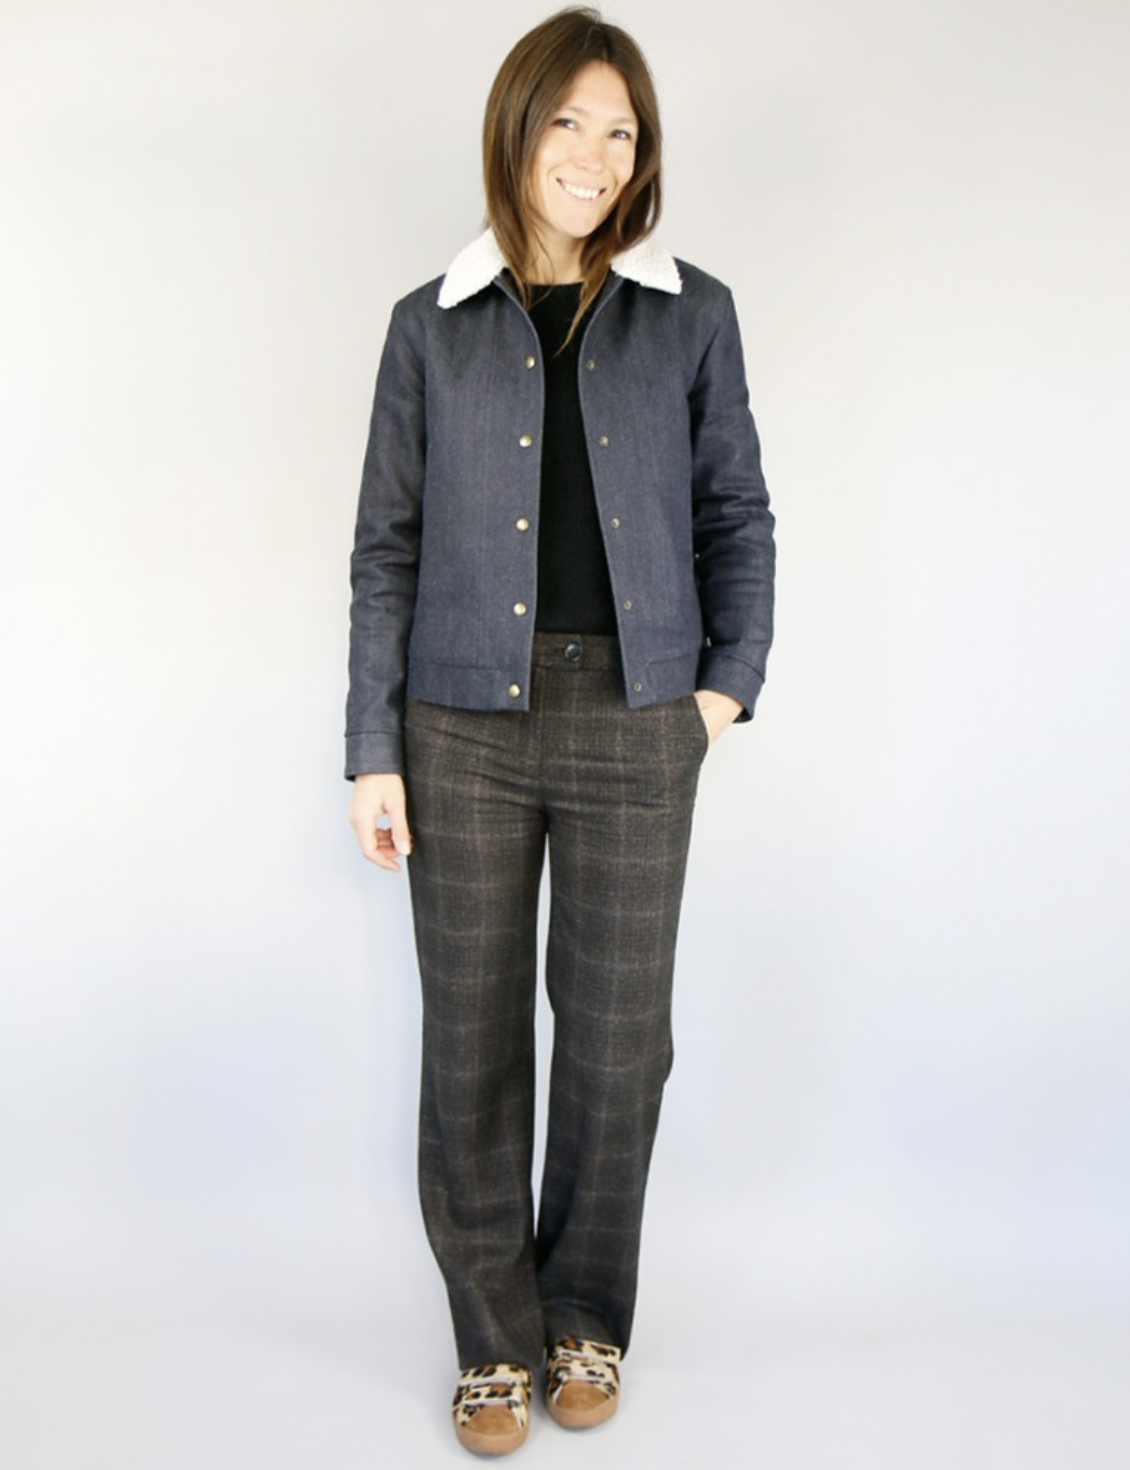 Woman wearing the Solstice Jacket sewing pattern from Atelier Scammit on The Fold Line. A jacket pattern made in medium to heavyweight wovens such as wool or jacquard fabrics, featuring slightly dropped shoulders, faux fur collar, high jetted pockets, ful